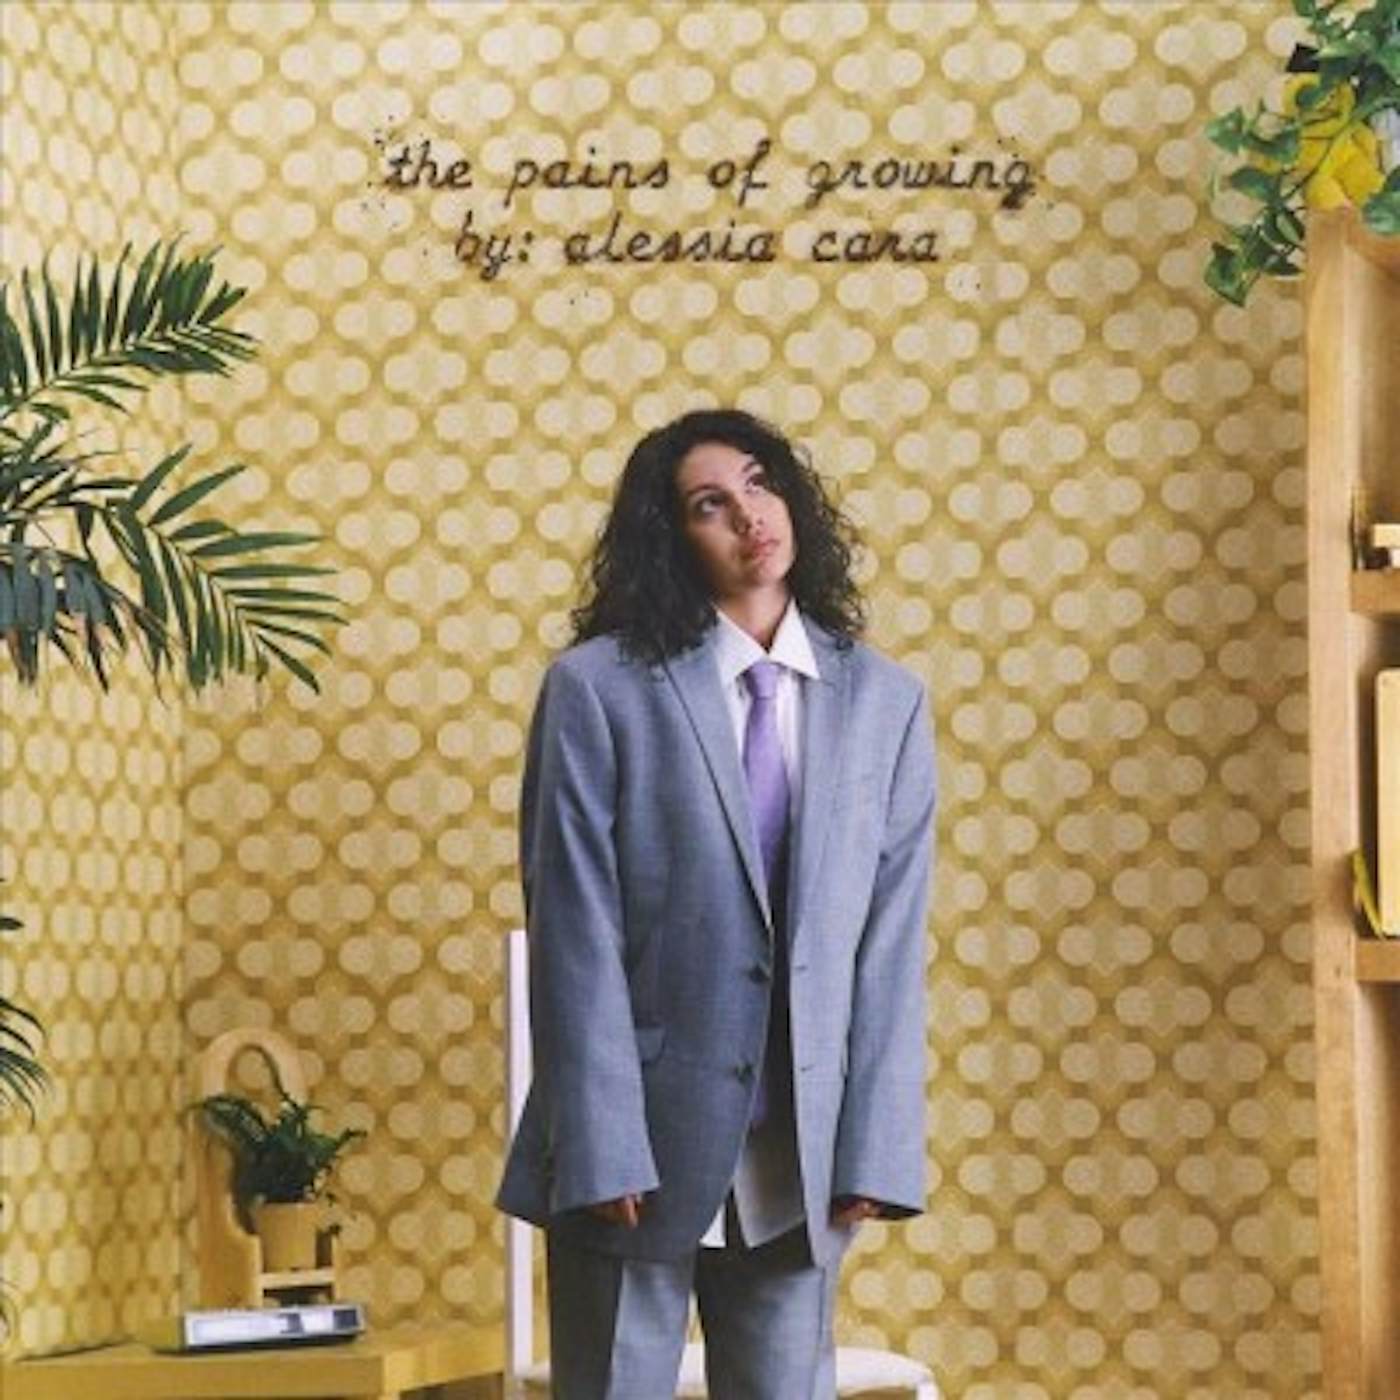 Alessia Cara The Pains Of Growing CD